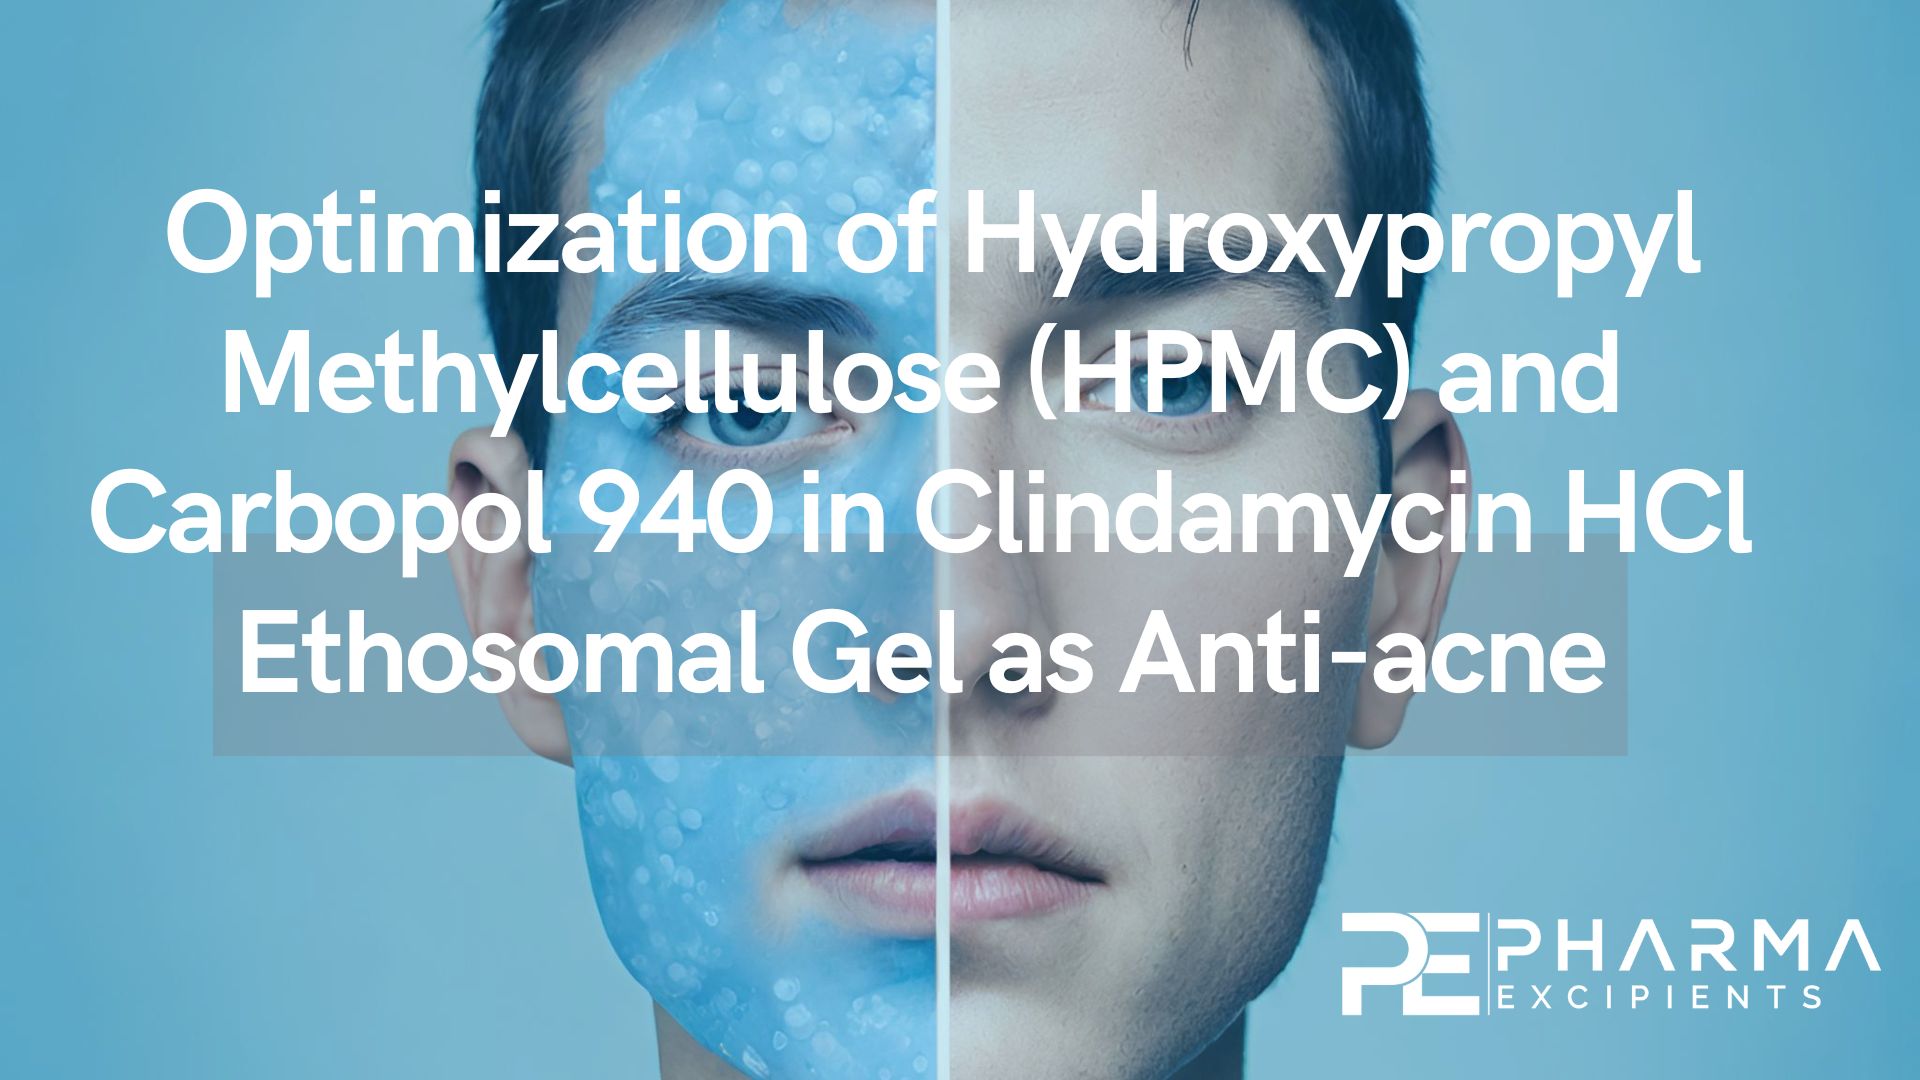 Optimization of Hydroxypropyl Methylcellulose (HPMC) and Carbopol 940 in Clindamycin HCl Ethosomal Gel as Anti-acne